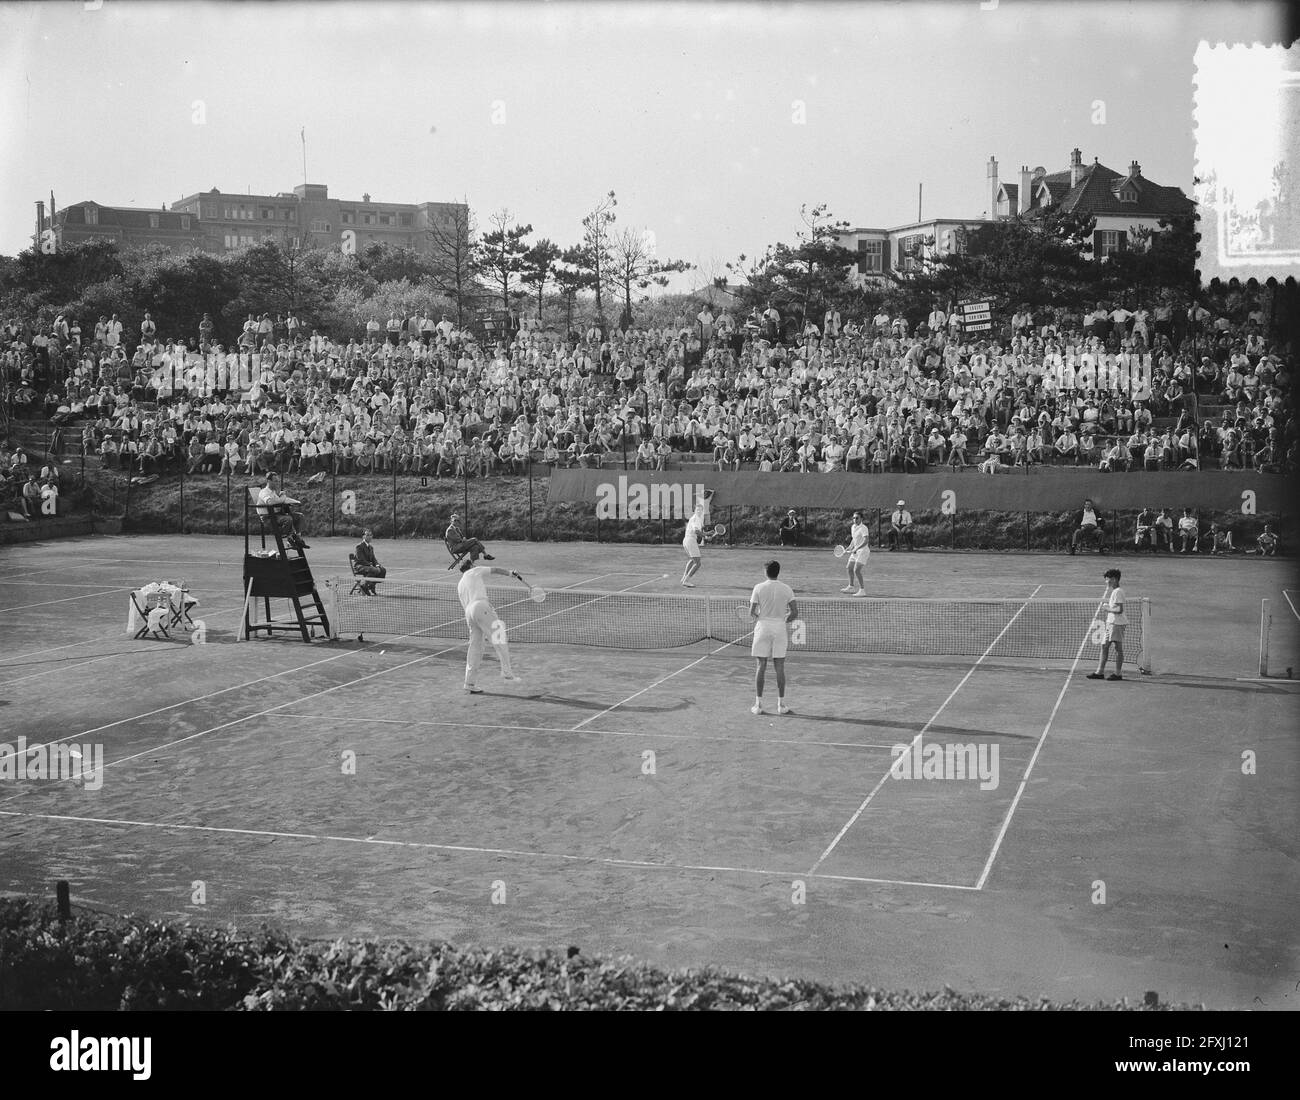 Wimbledon tennis game in Noordwijk, Patty Drobny, by Ewal Savith, July 6, 1952, The Netherlands, 20th century press agency photo, news to remember, documentary, historic photography 1945-1990, visual stories, human history of the Twentieth Century, capturing moments in time Stock Photo